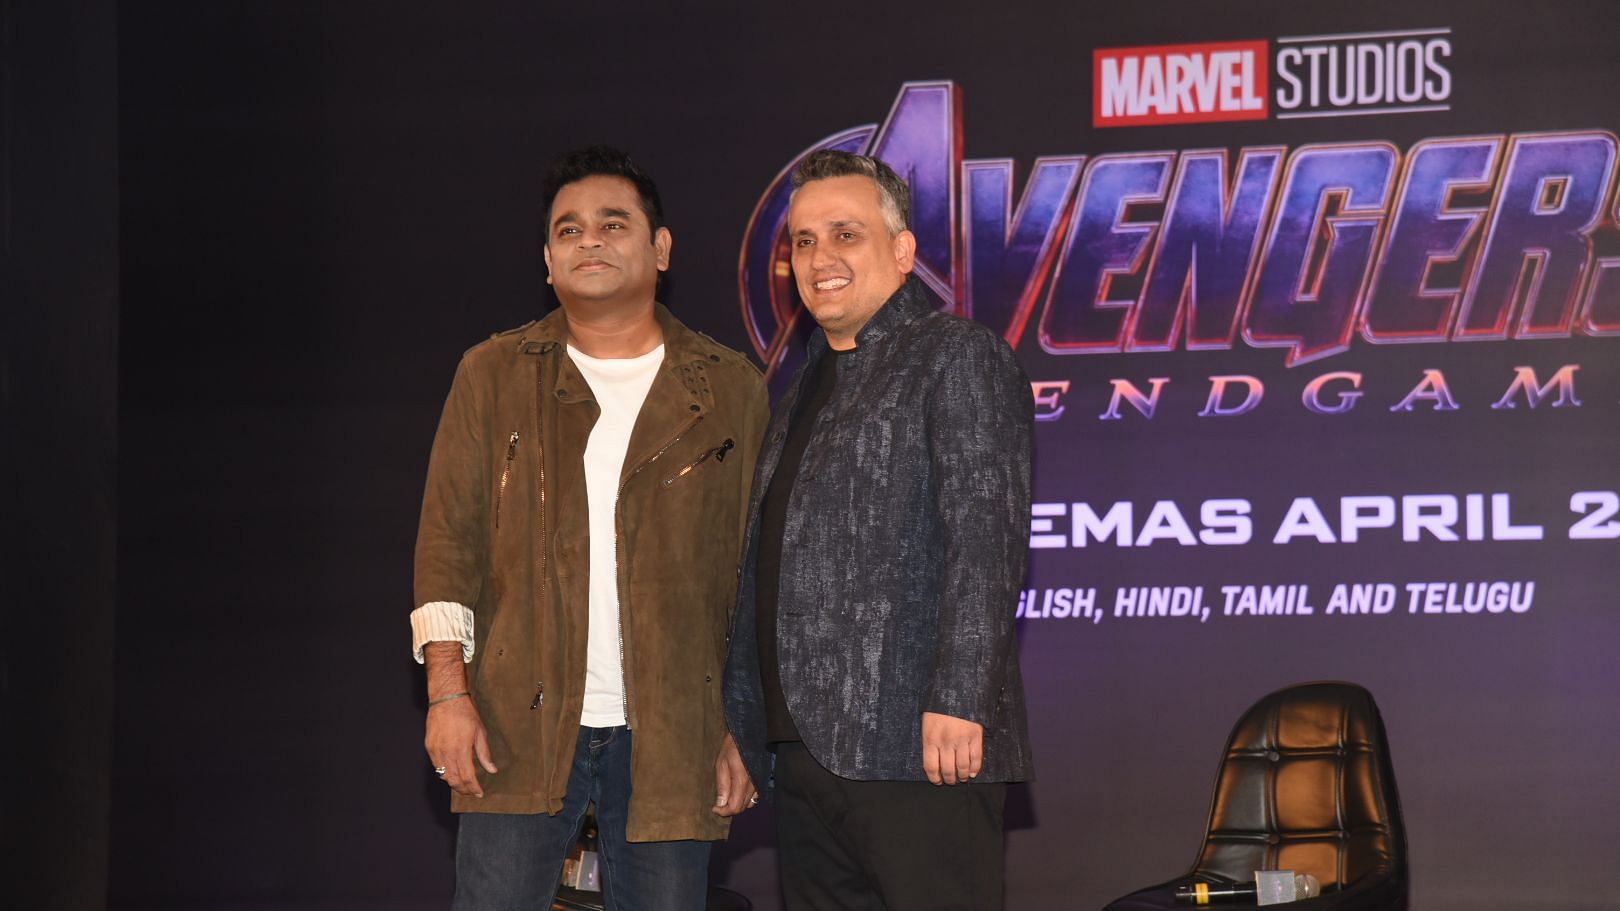 Joe Russo and A R Rahman at the event.